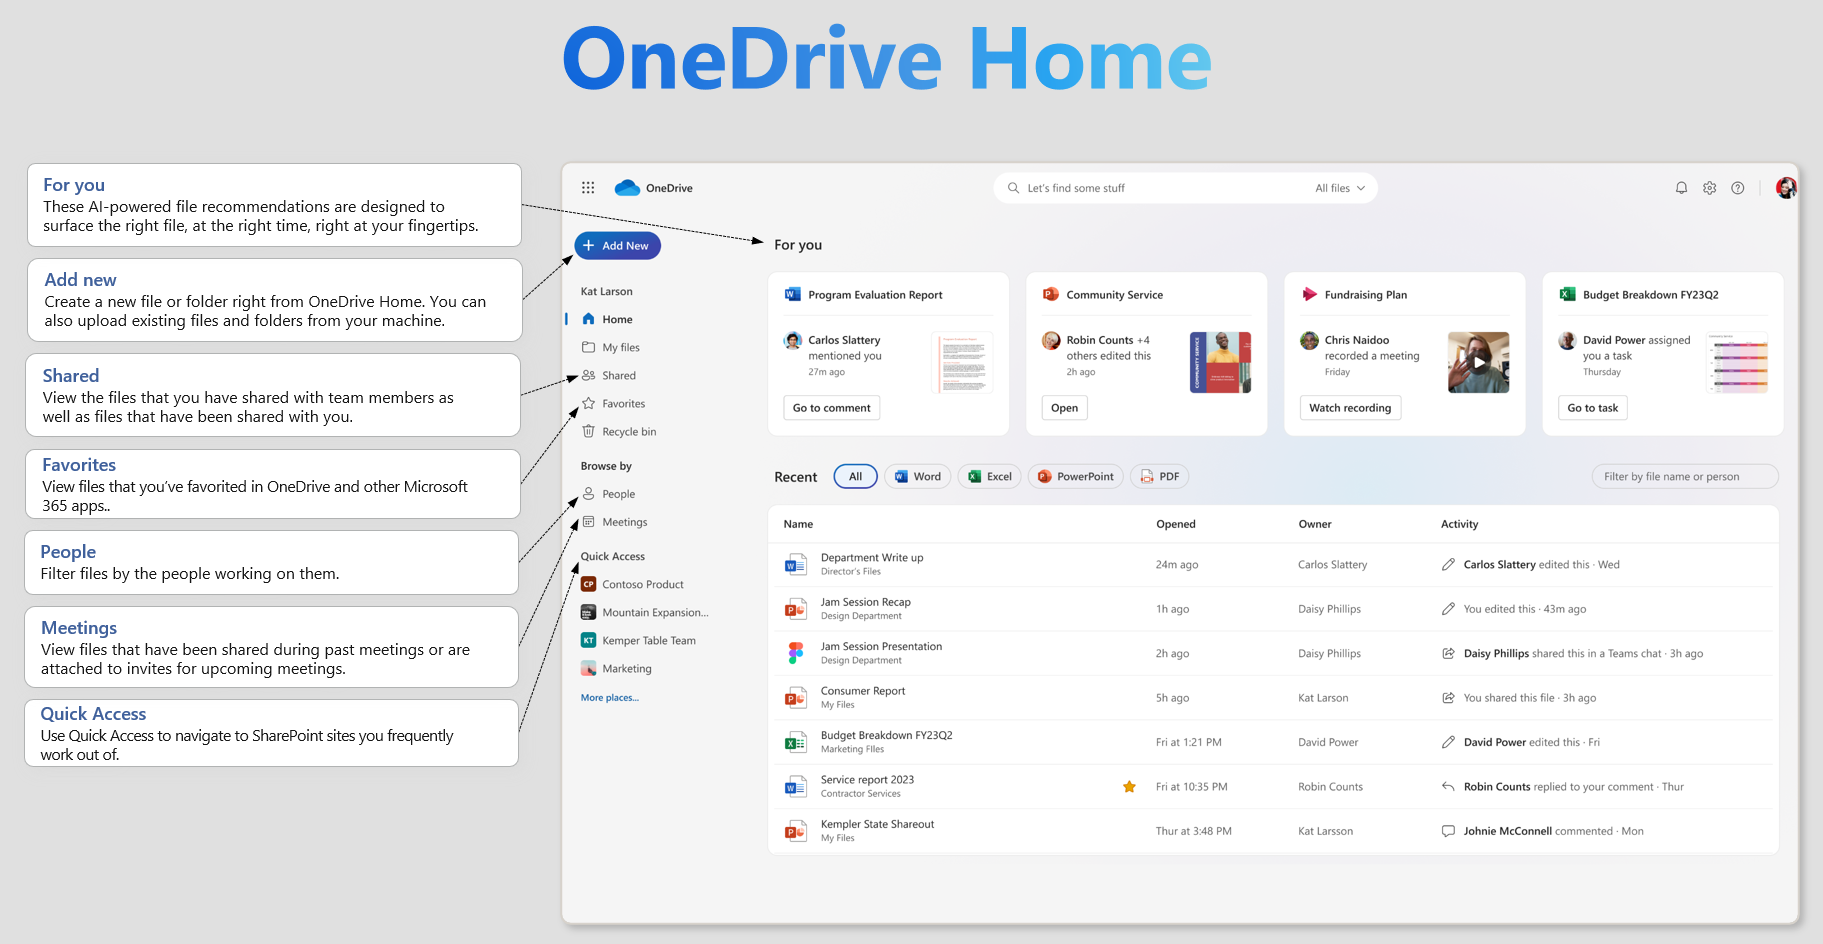 image of labelled OneDrive Home